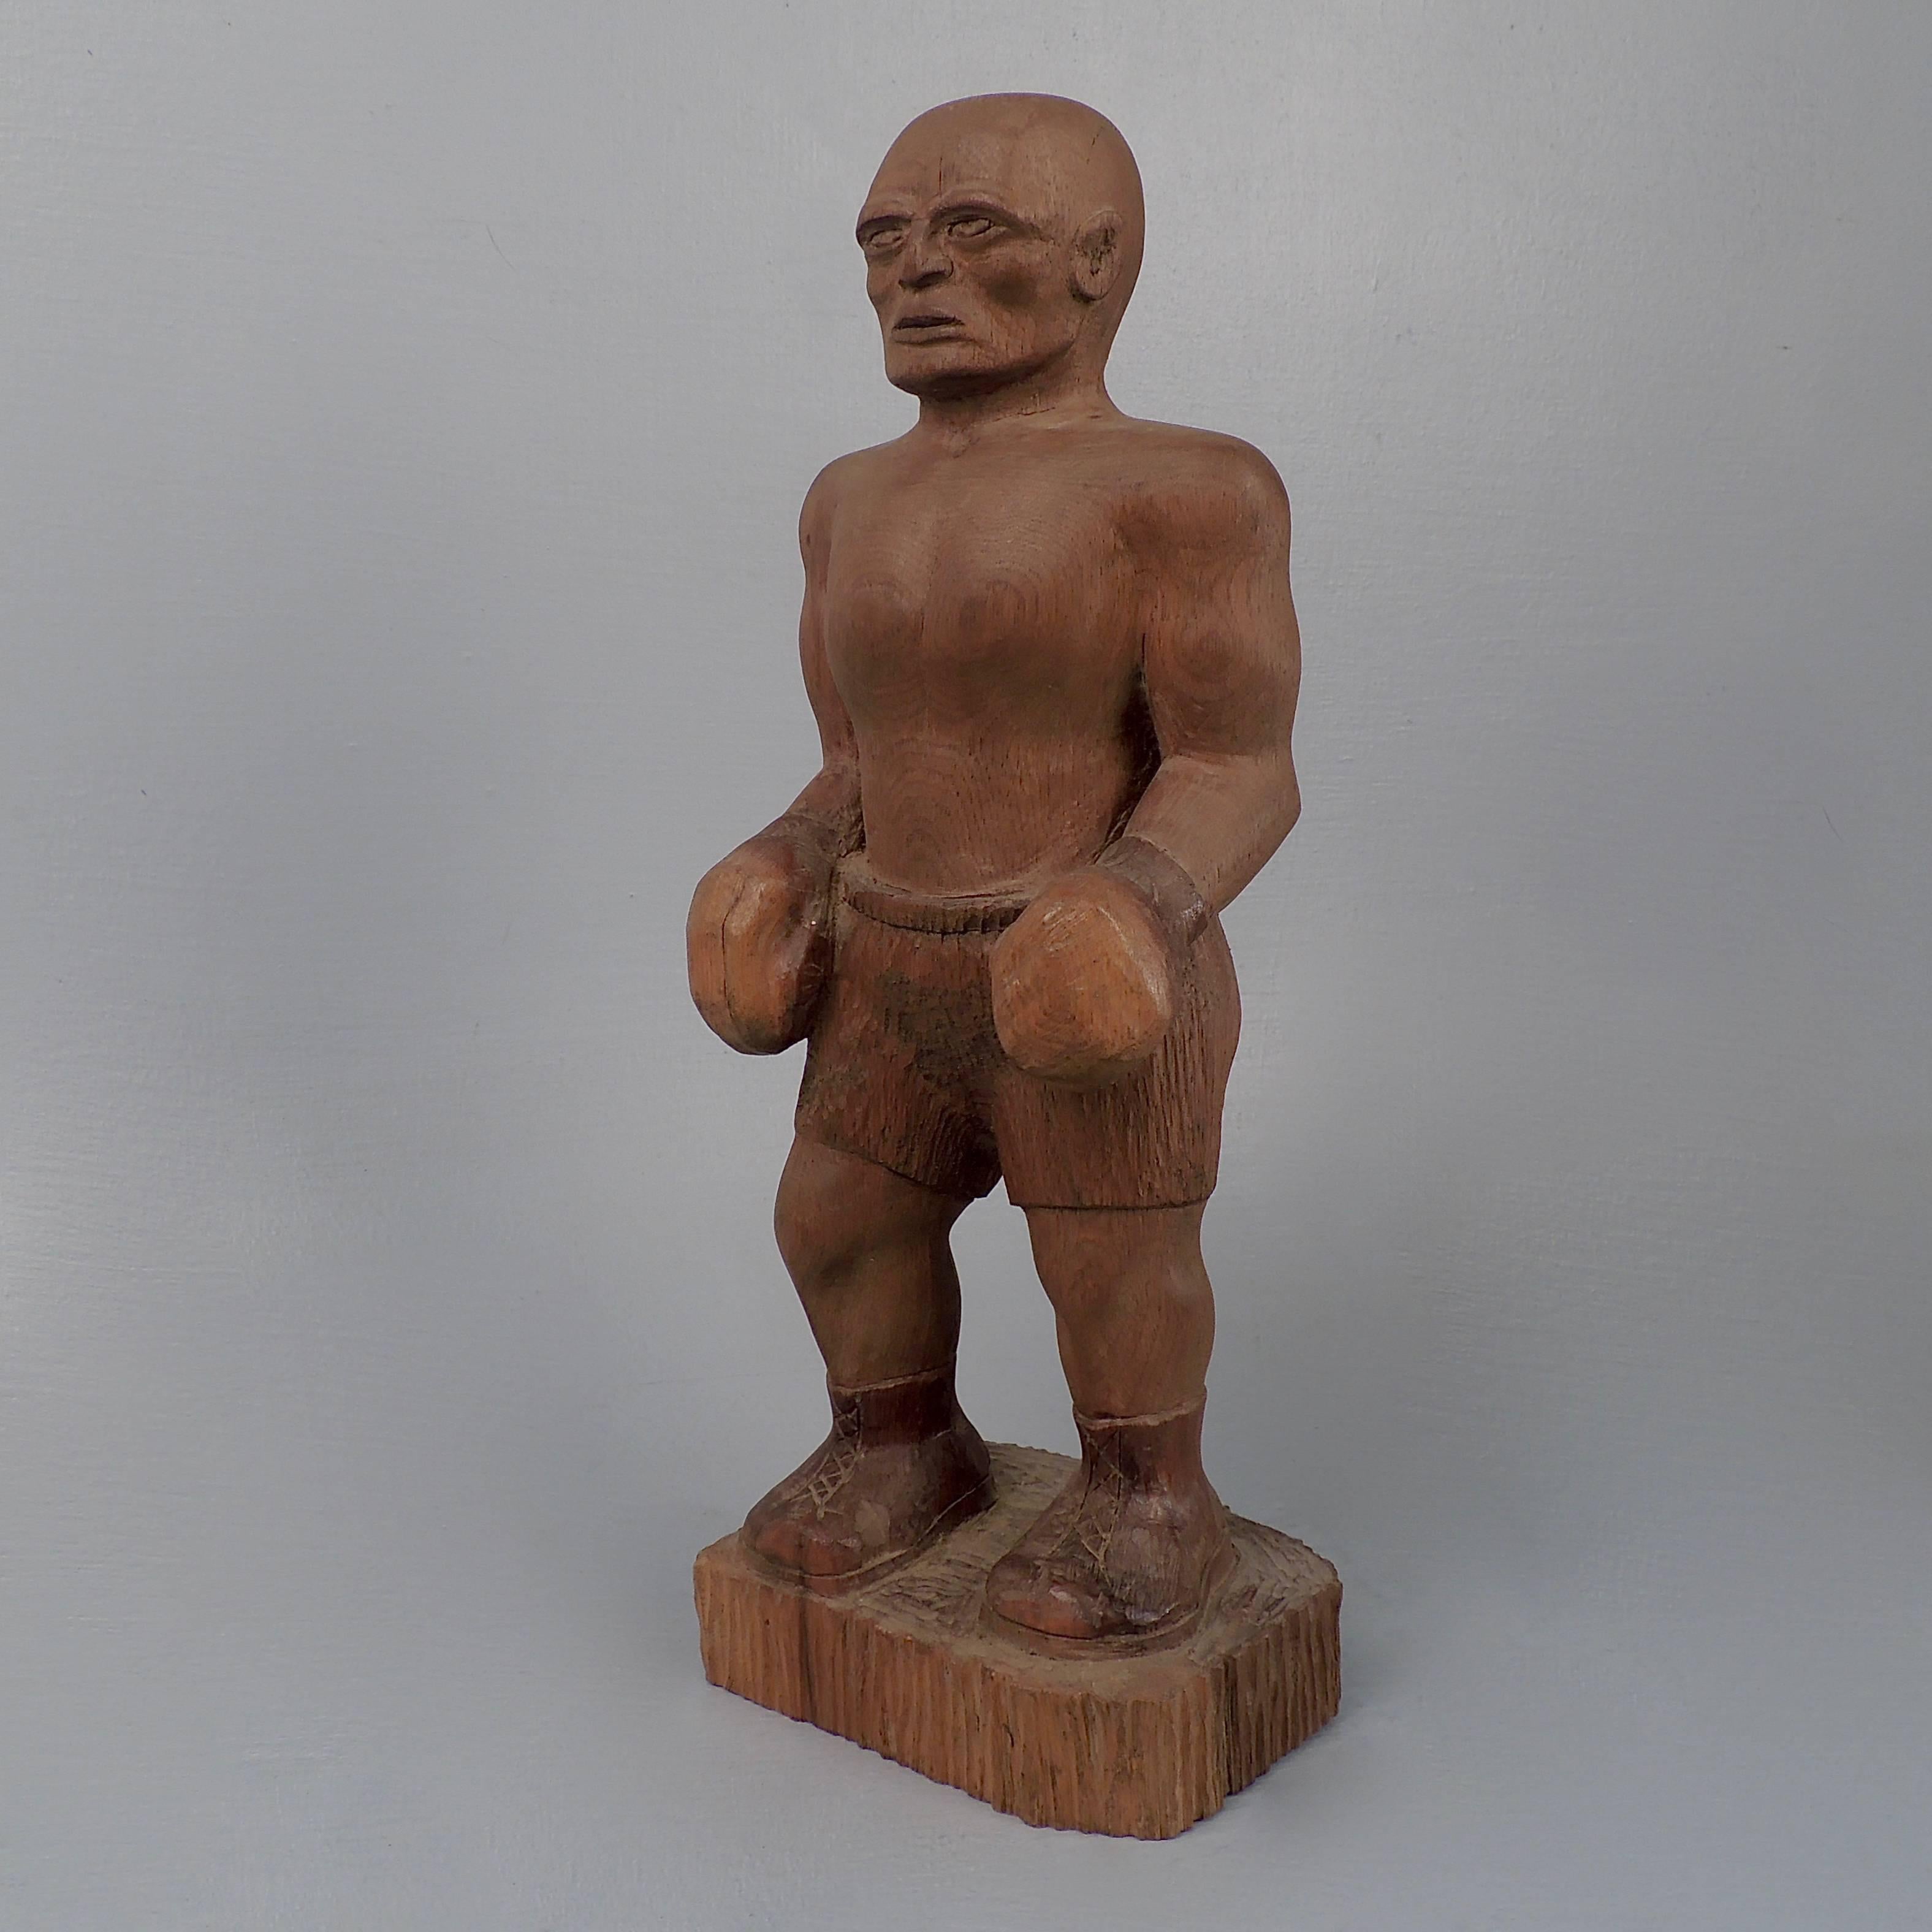 A terrific 20th century carved wooden folk art sculpture of a boxer. The boxer stands erect, one foot slightly behind the other, with his hands at his side. He has a slightly flattened nose and slightly oversized ear. A depiction of Jim Thorpe